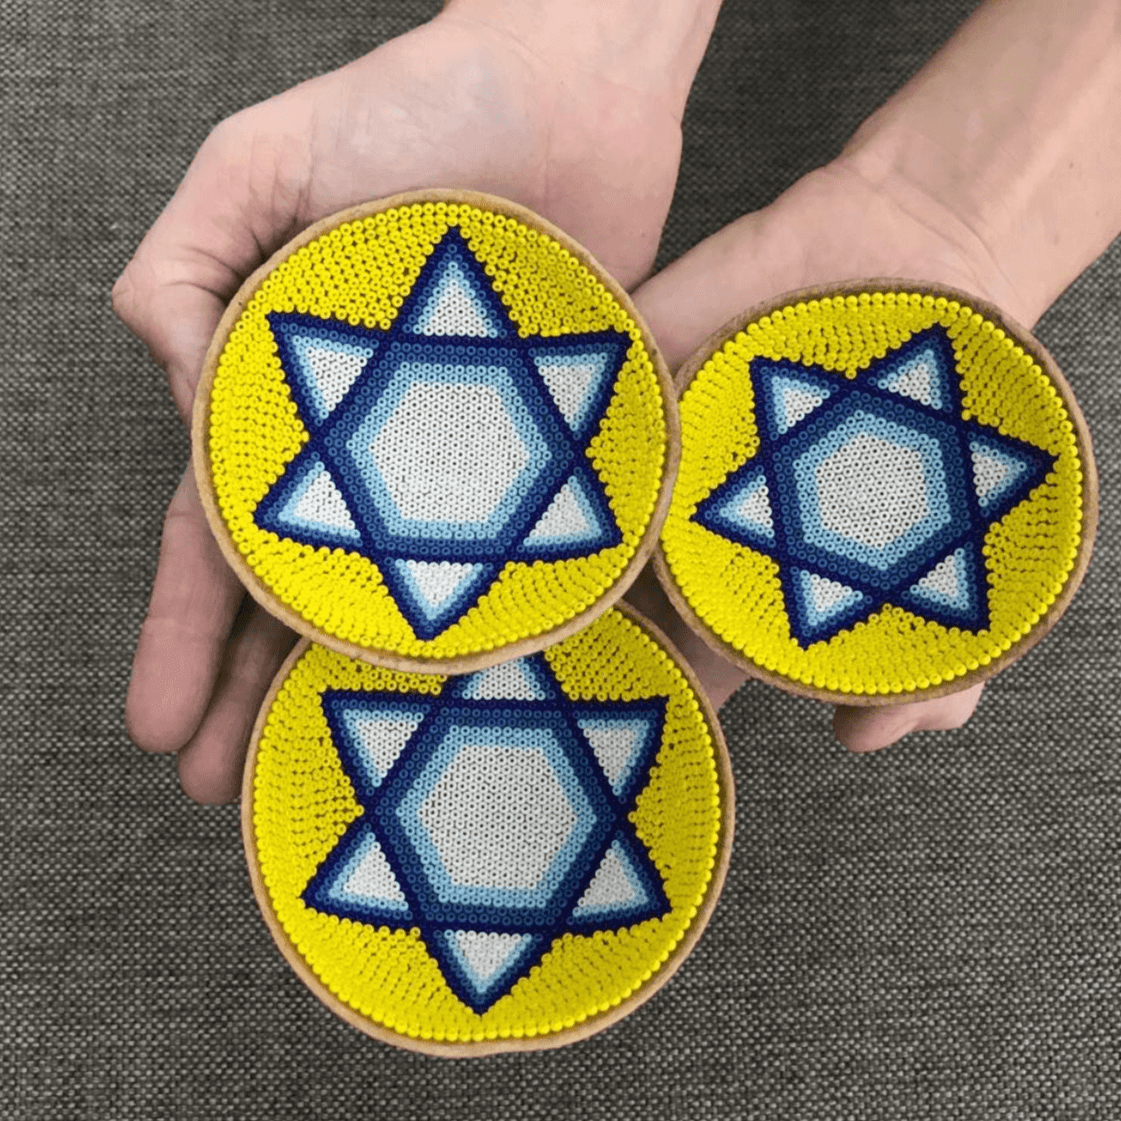 Human Connections Bowl Handmade Star of David Trinket Bowl - Yellow/Blue or Brown/Pink